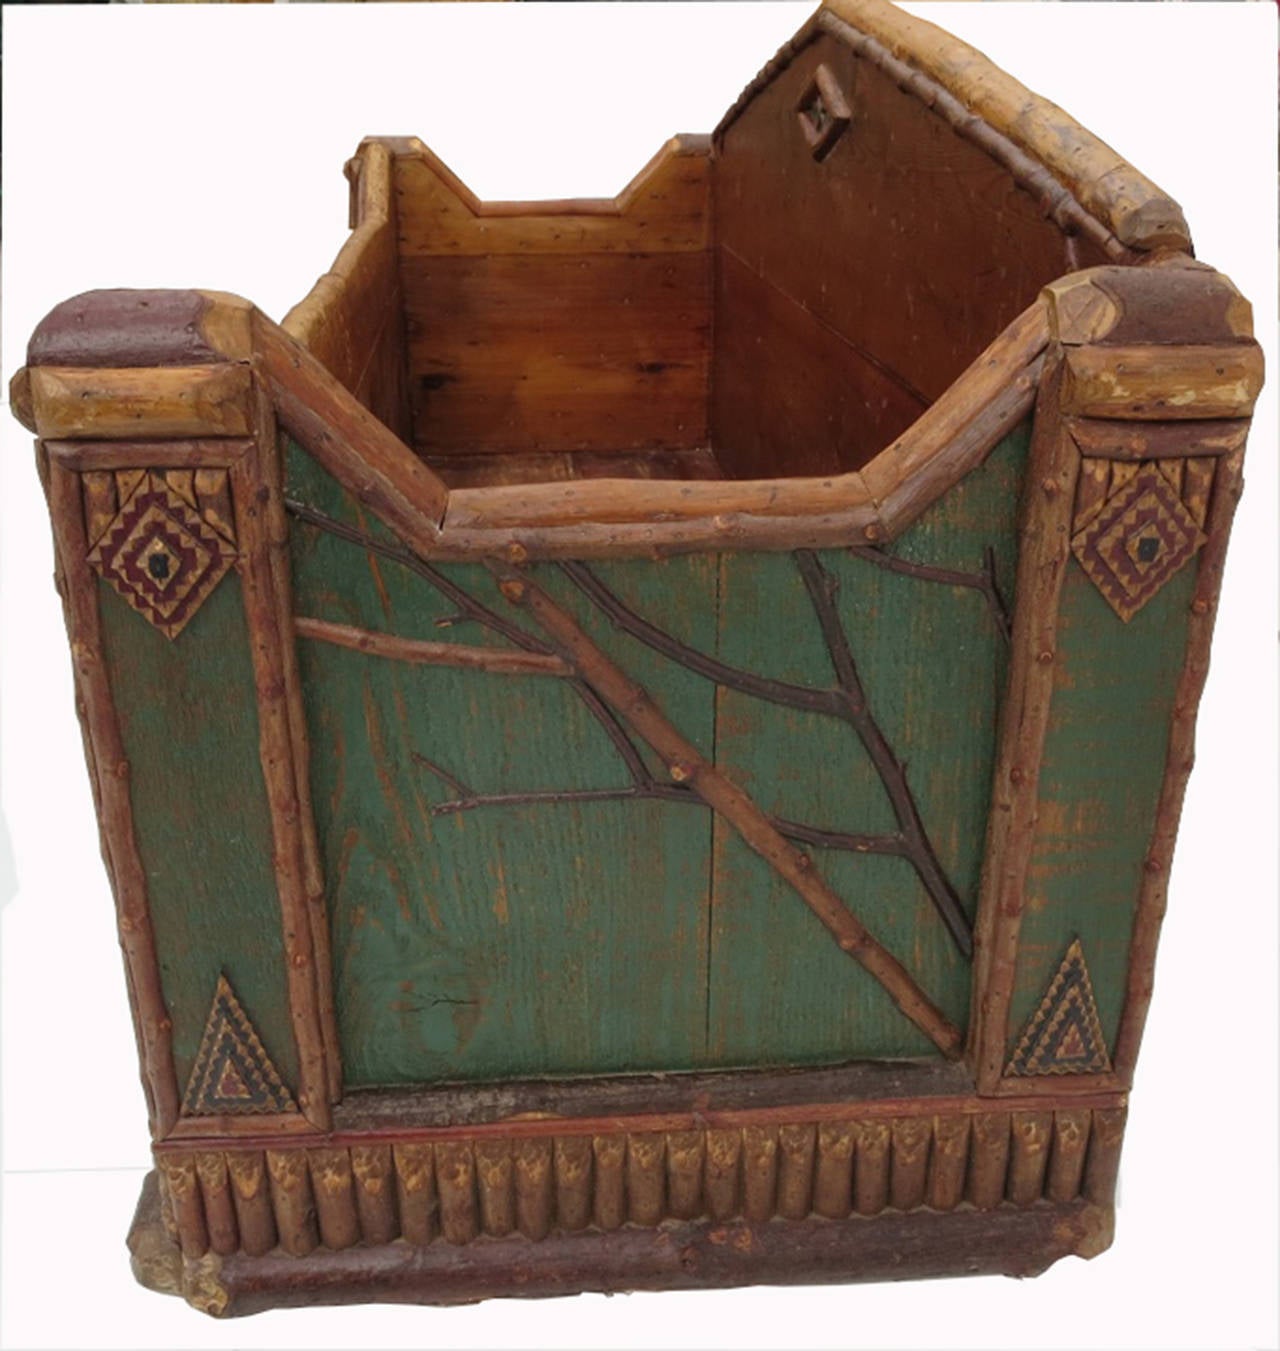 An incredible example of American rustic style, this painted wooden log receptacle is certainly influenced by the works of Thomas Molesworth. Delicate tree branch forms adorn the front and sides of the box to great effect. The base and feet are